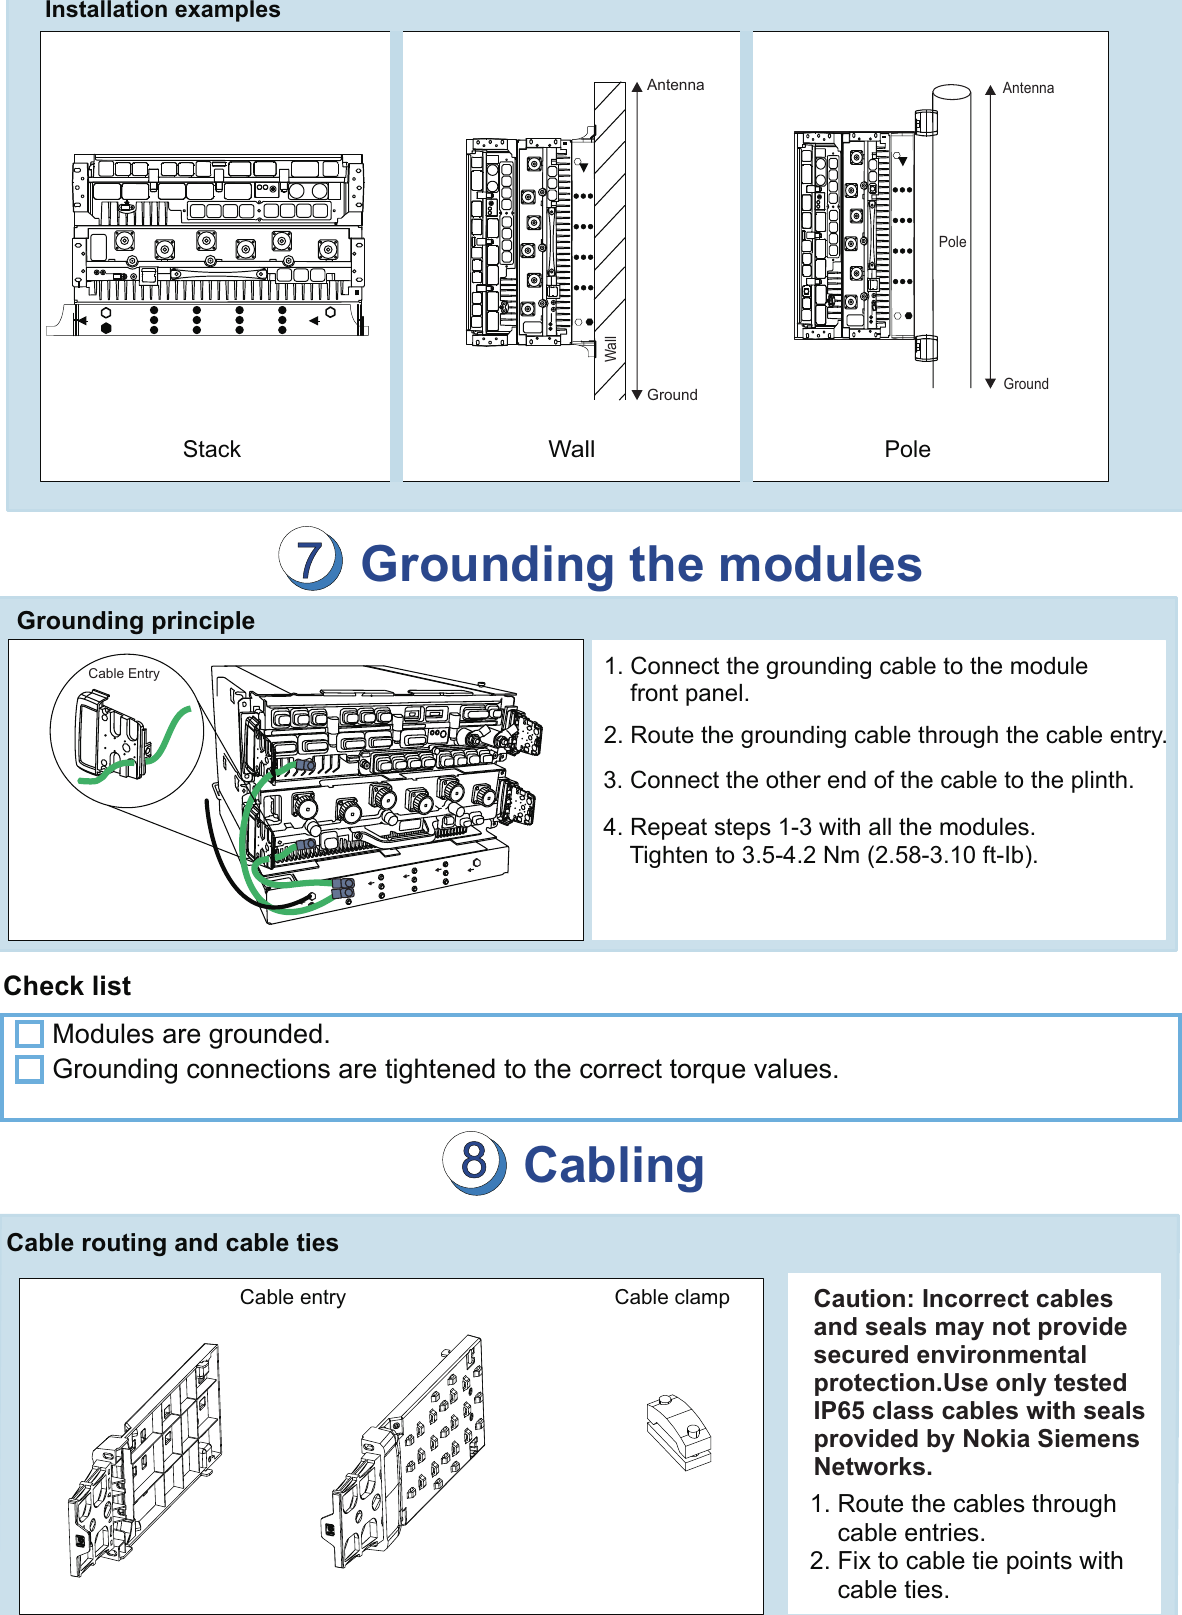 Grounding principleModules are grounded.Check list1. Connect the grounding cable to the module     front panel.2. Route the grounding cable through the cable entry.3. Connect the other end of the cable to the plinth.4. Repeat steps 1-3 with all the modules.    Tighten to 3.5-4.2 Nm (2.58-3.10 ft-Ib). Grounding the modules1. Route the cables through     cable entries.2. Fix to cable tie points with     cable ties.   Cable clampCablingCable routing and cable tiesCable entry87GroundAntennaWallStackInstallation examplesPoleWallGroundAntennaPoleCable EntryGrounding connections are tightened to the correct torque values.Caution: Incorrect cables and seals may not provide secured environmental protection.Use only tested IP65 class cables with seals provided by Nokia Siemens Networks.